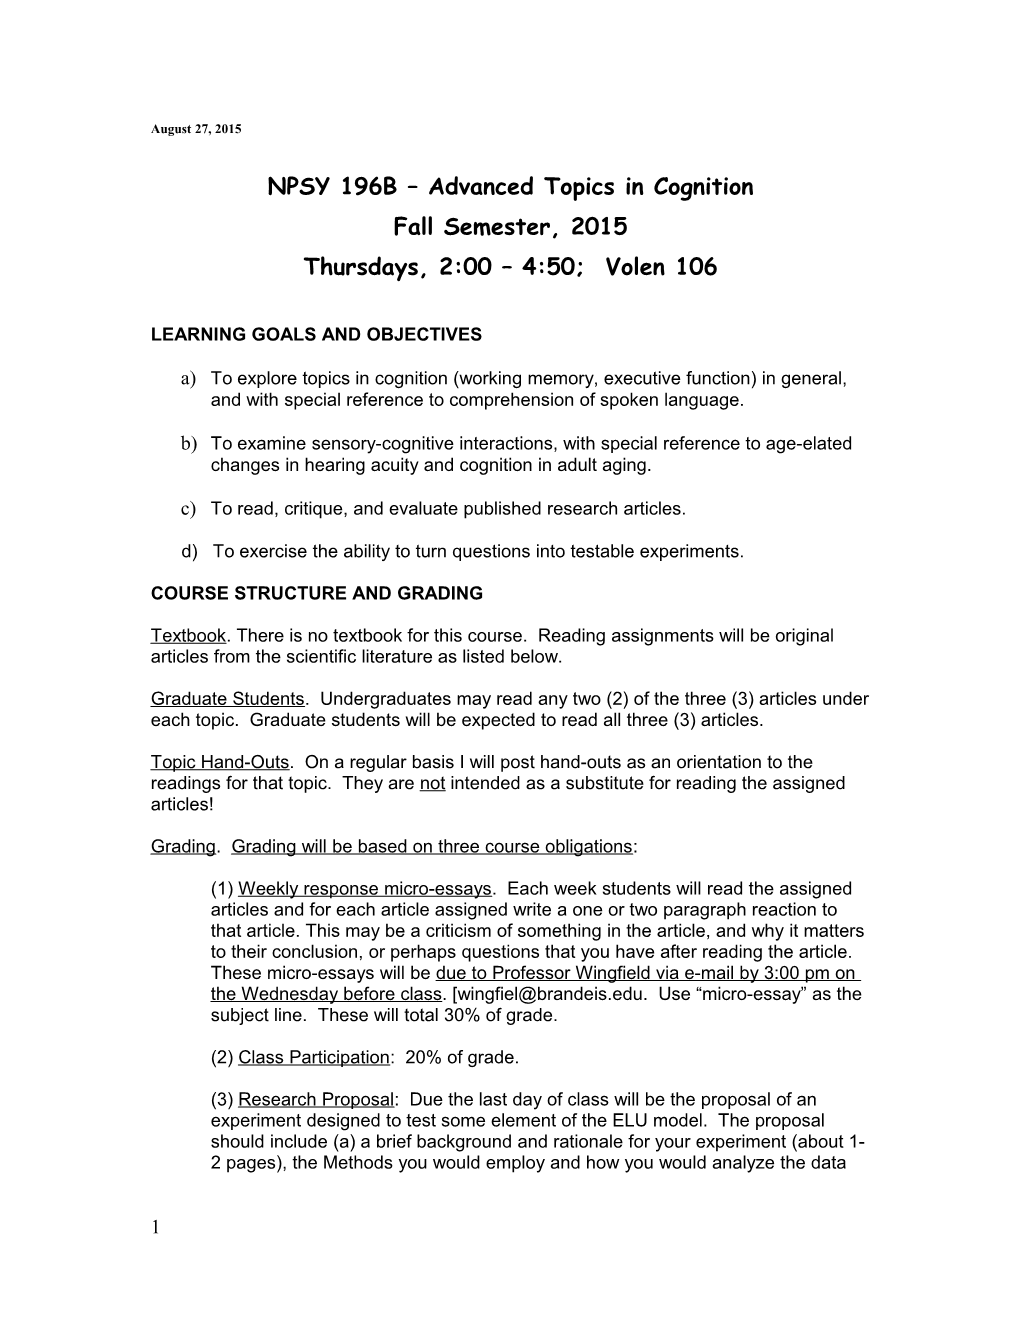 NPSY 196B Advanced Topics in Cognition